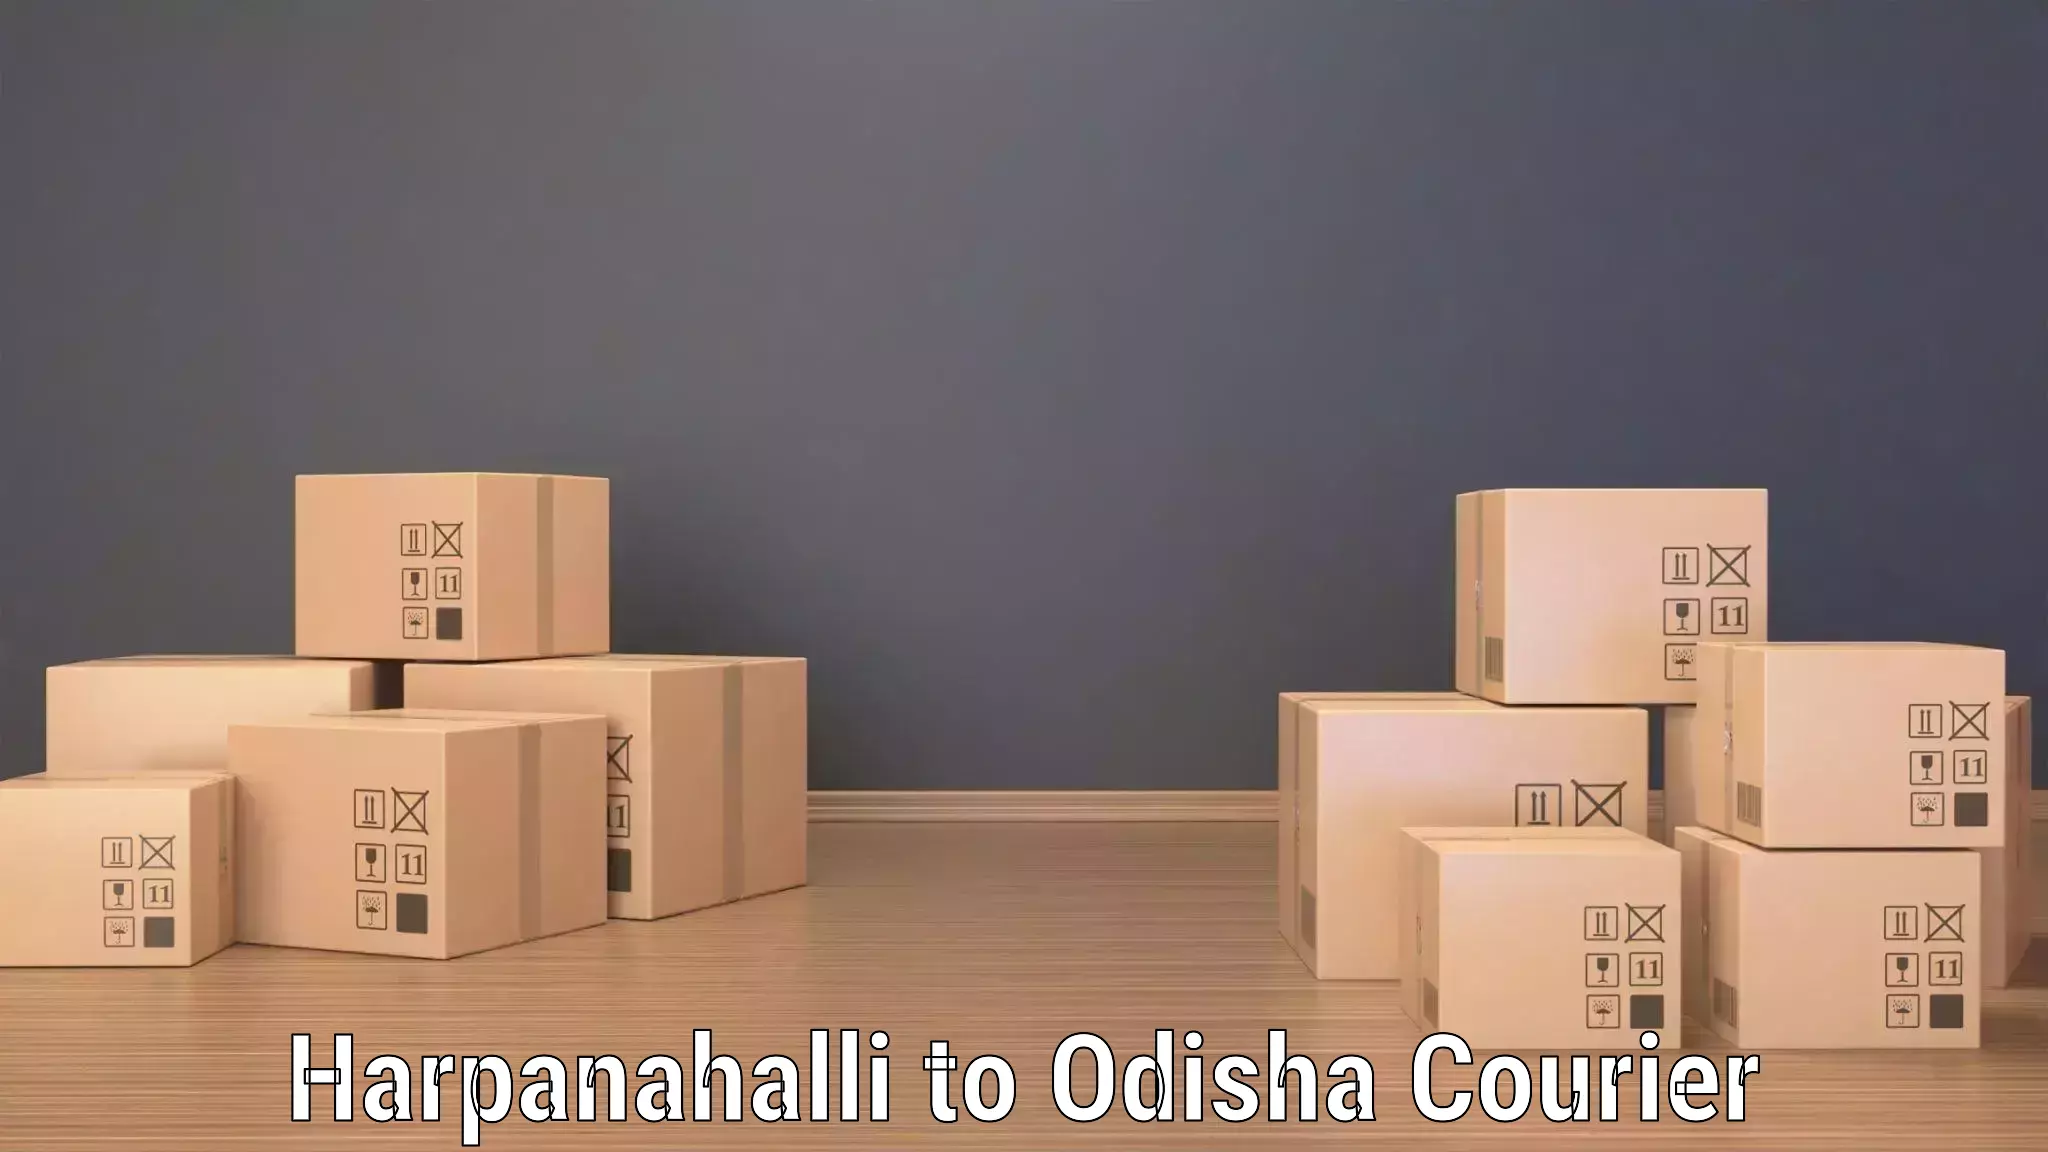 State-of-the-art courier technology in Harpanahalli to Binjharpur